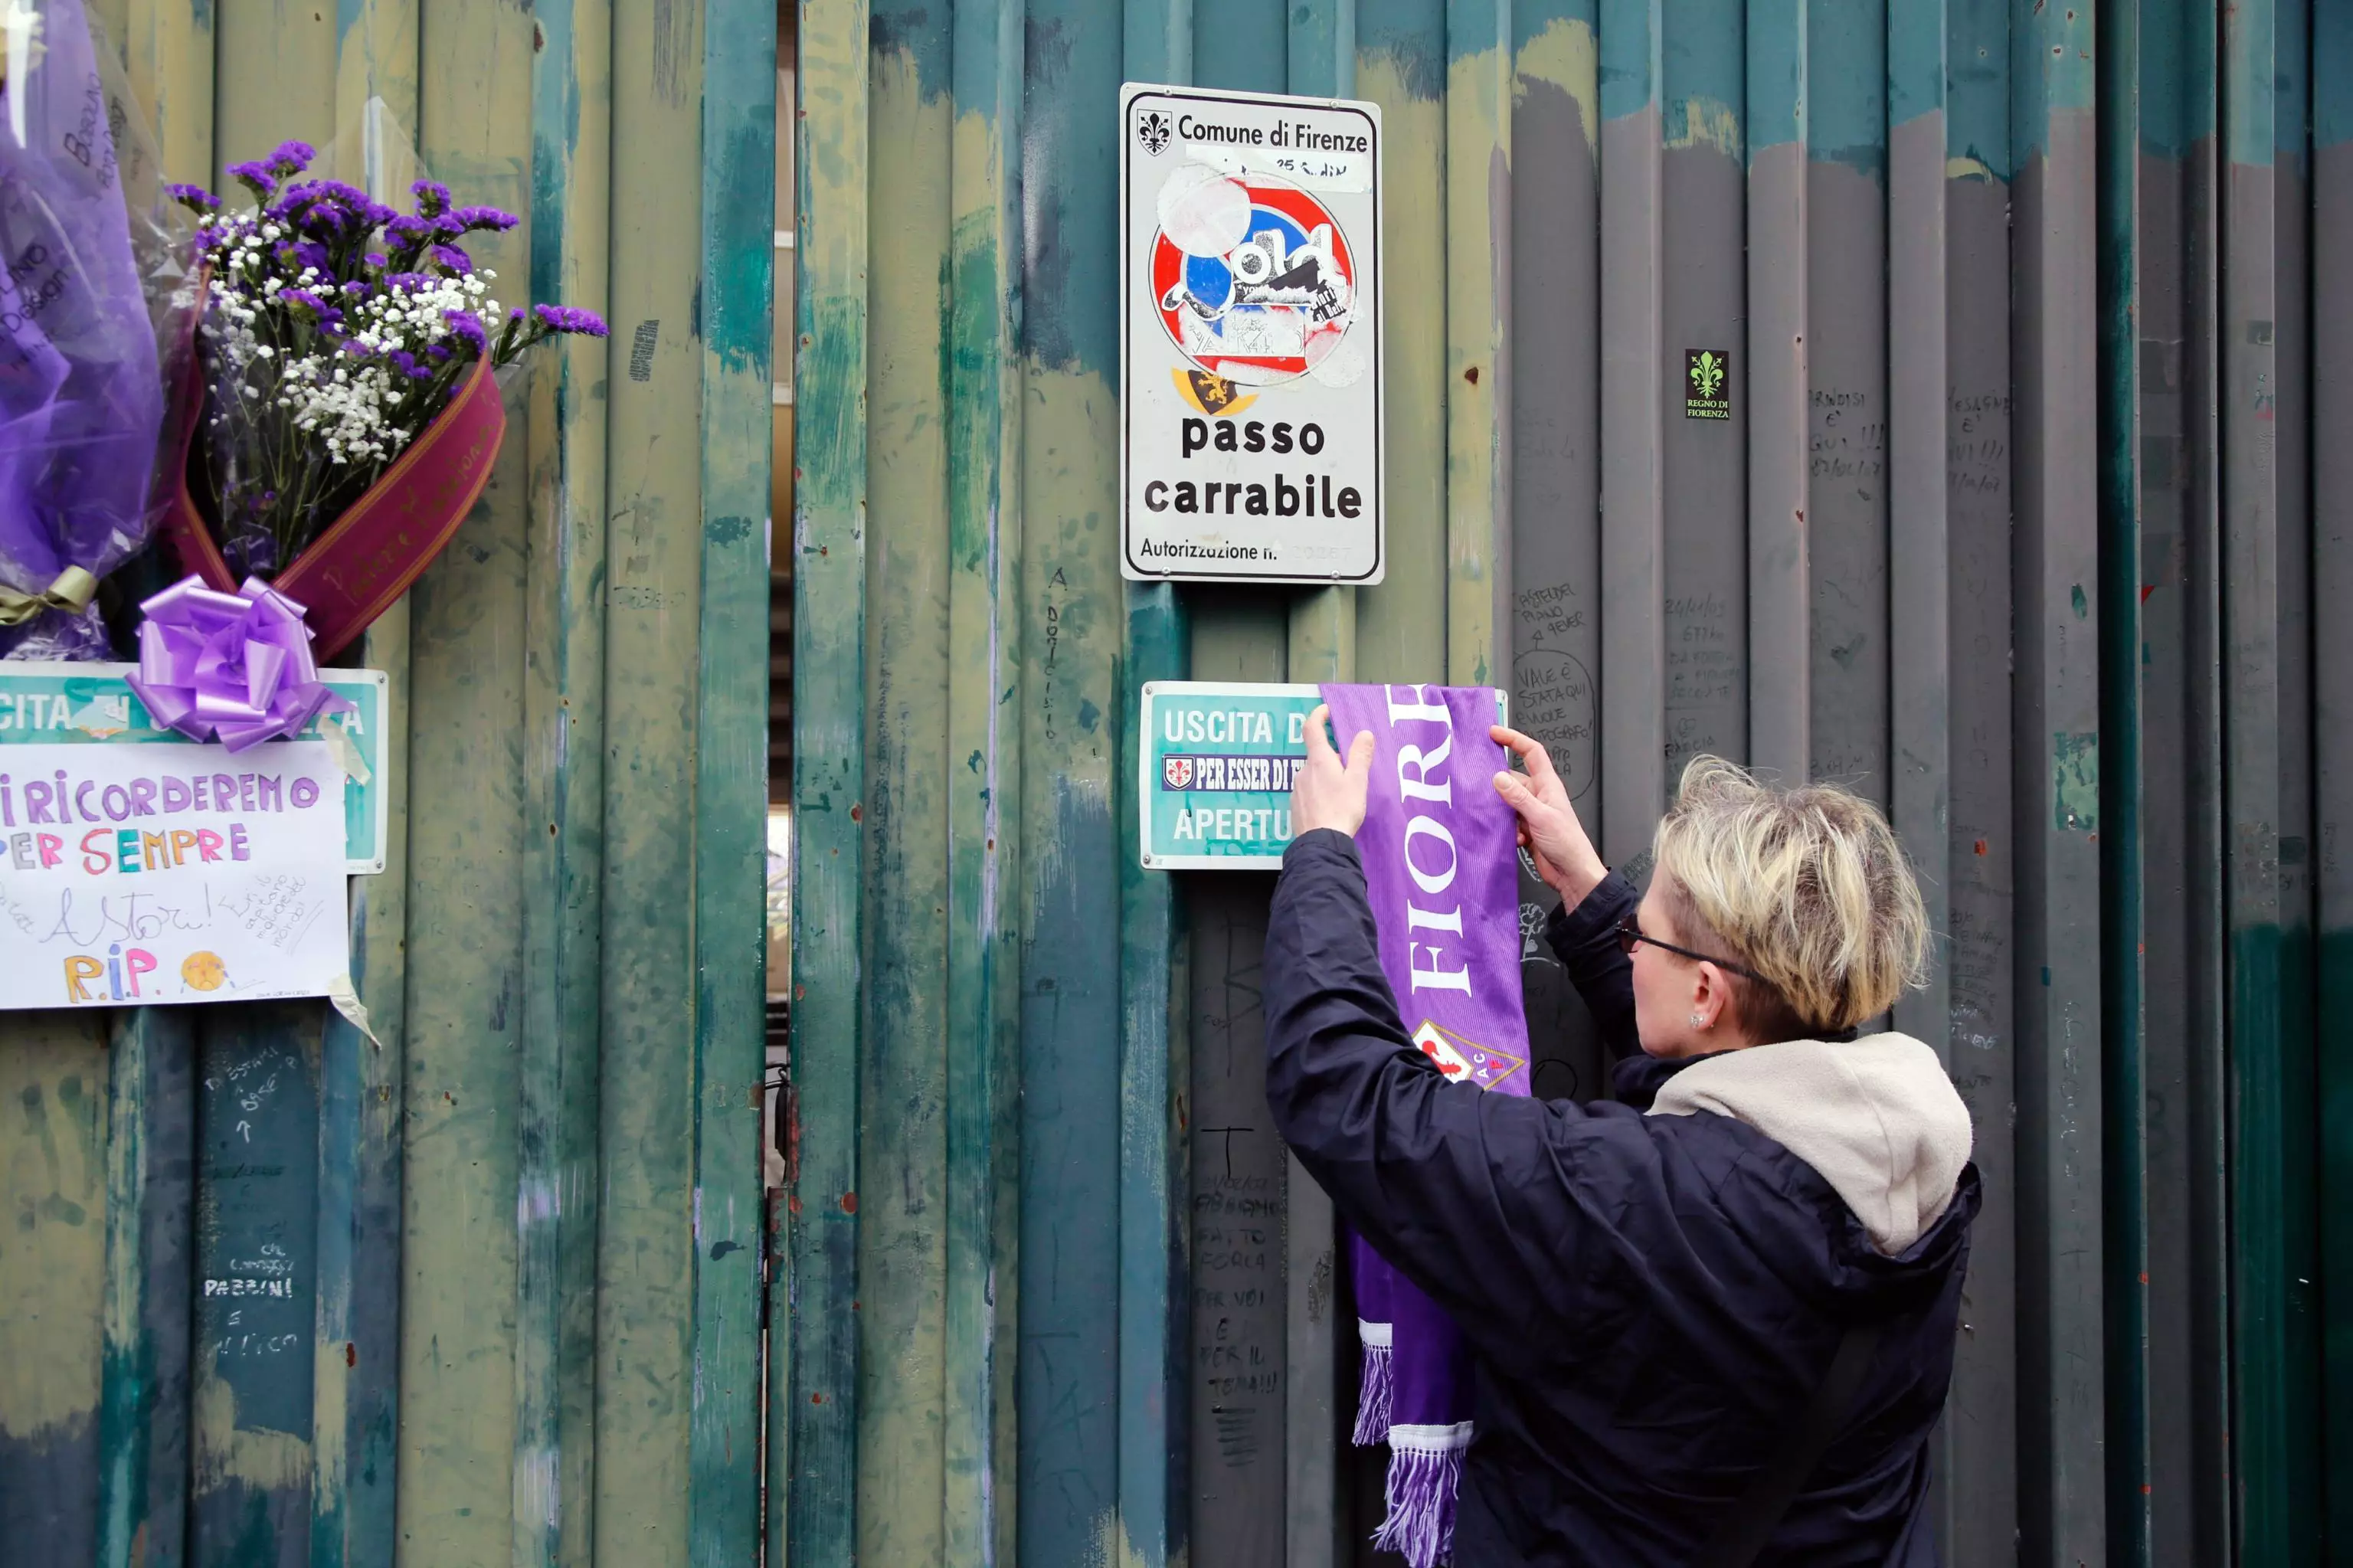 Fiorentina fans pay tribute to their fallen skipper. Images: PA